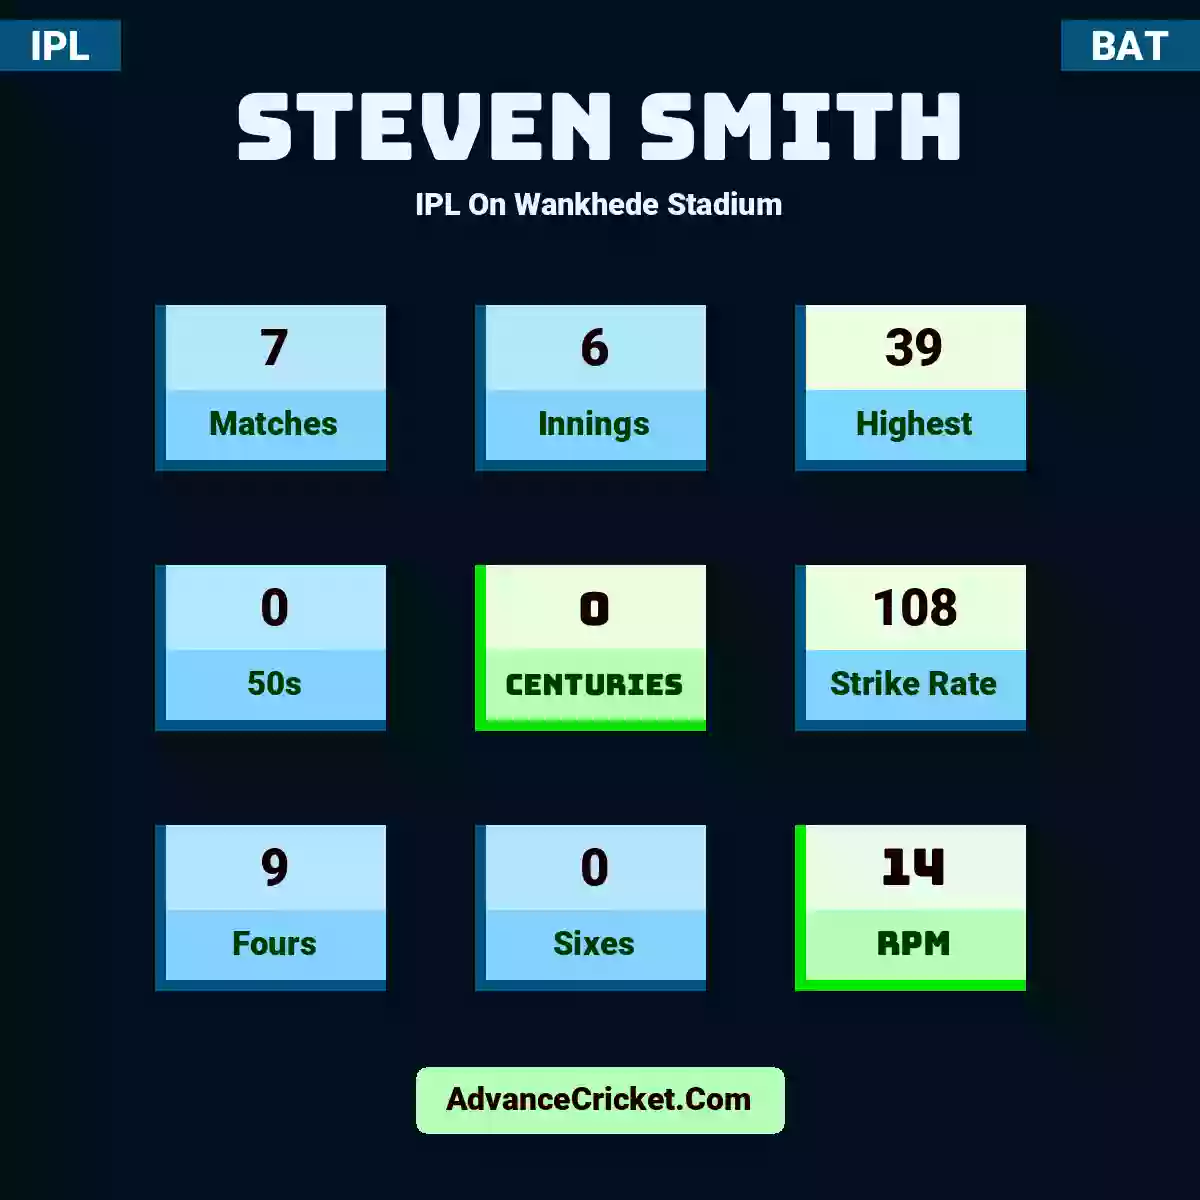 Steven Smith IPL  On Wankhede Stadium, Steven Smith played 7 matches, scored 39 runs as highest, 0 half-centuries, and 0 centuries, with a strike rate of 108. S.Smith hit 9 fours and 0 sixes, with an RPM of 14.